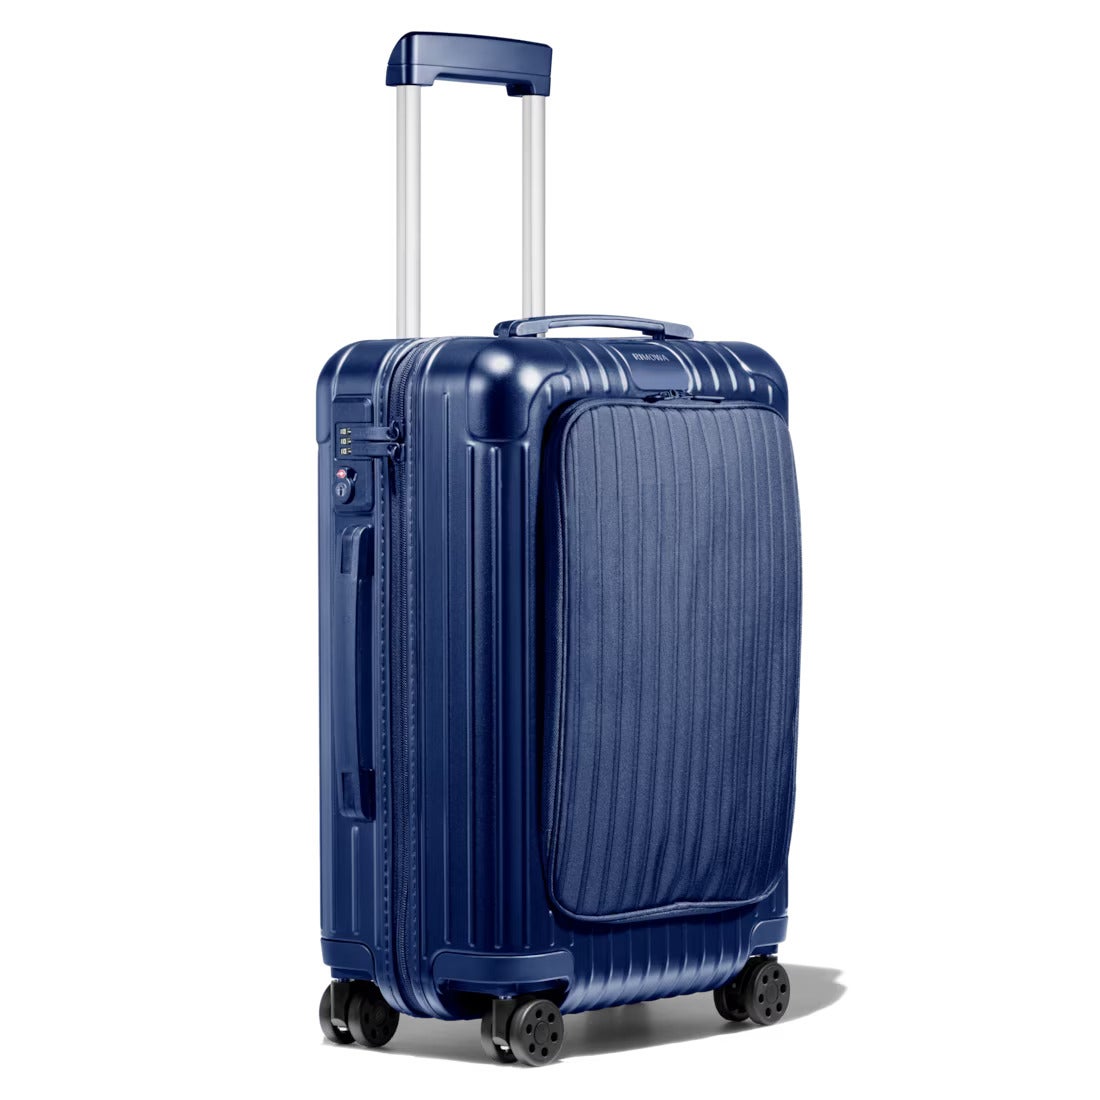 Most Durable Luggage For Long-Haul Travel